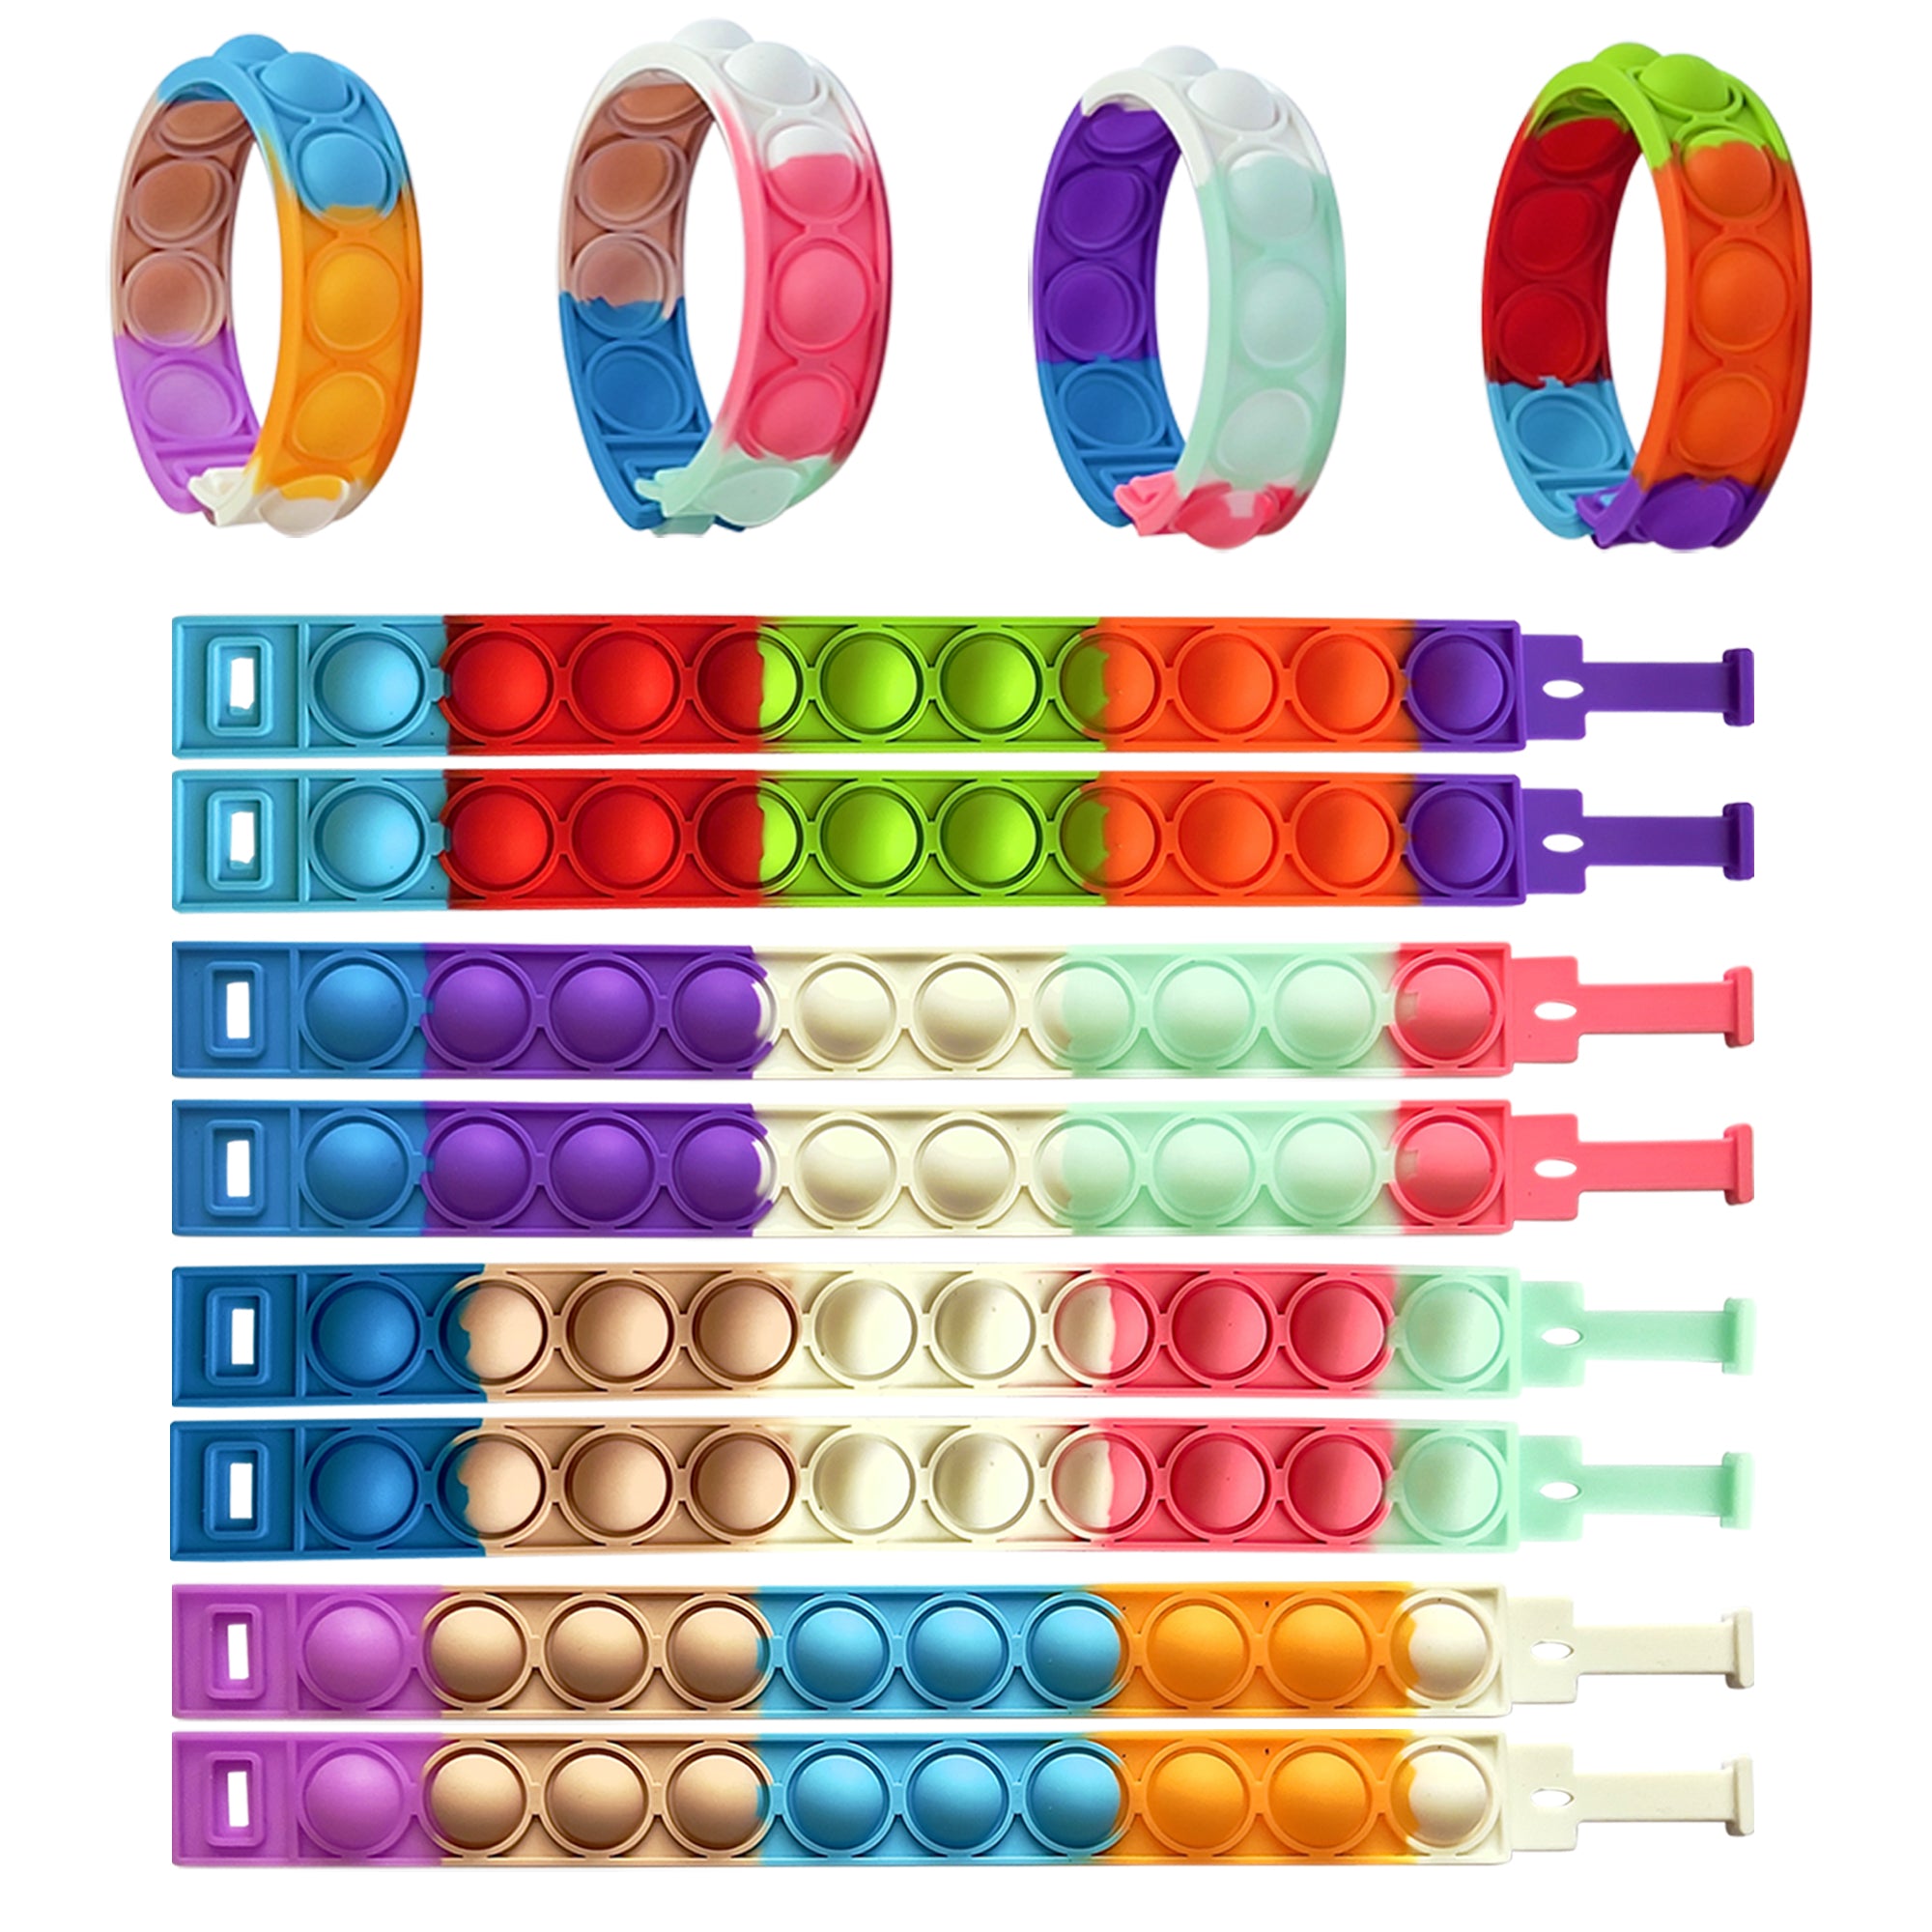 32 PCS Pop it Fidget Bracelets Toy, Adjustable Rainbow Party Favors, Anti-Anxiety Stress Relief Wristband Set, Push Bubbles Sensory Autistic Pack Kids All Ages Toddler Adult Gift